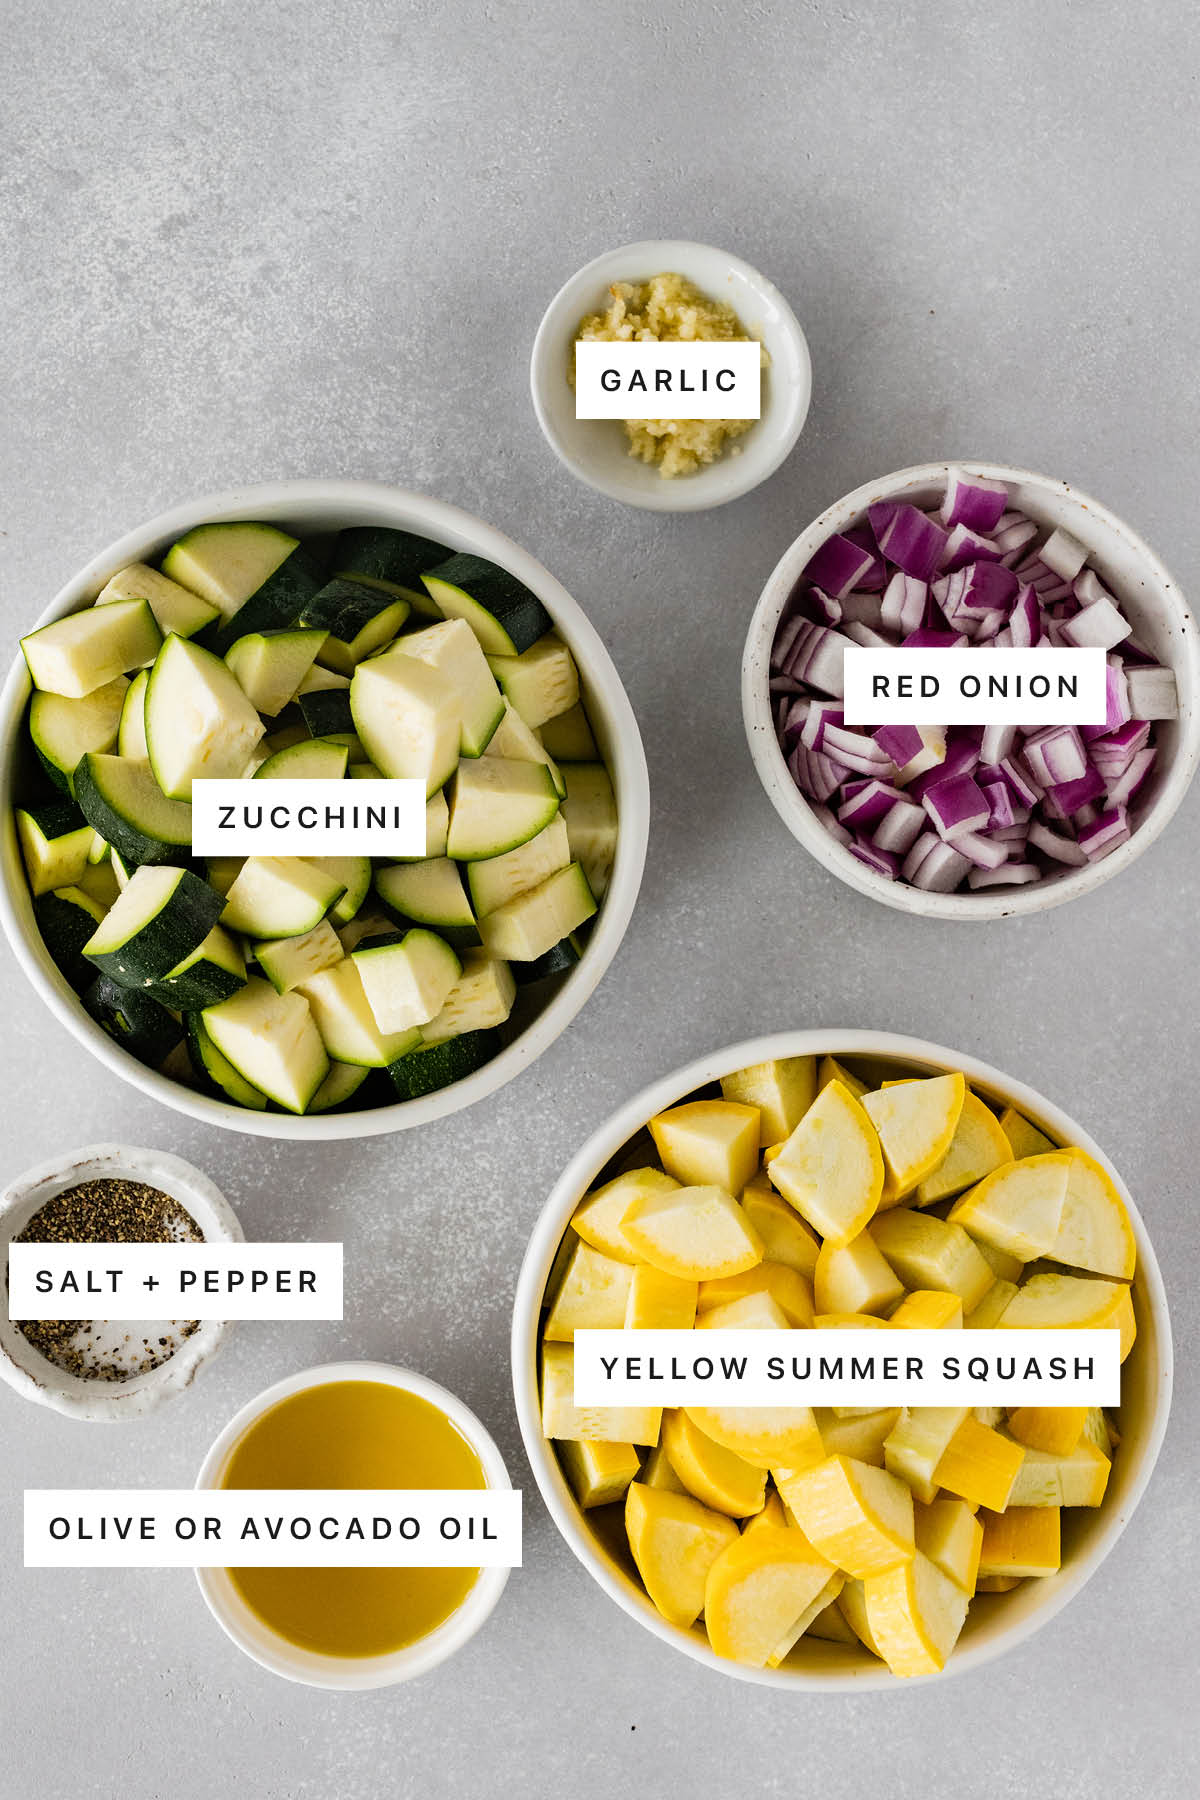 Ingredients measured out to make Roasted Zucchini and Squash: garlic, red onion, zucchini, salt, pepper, yellow summer squash and olive oil.